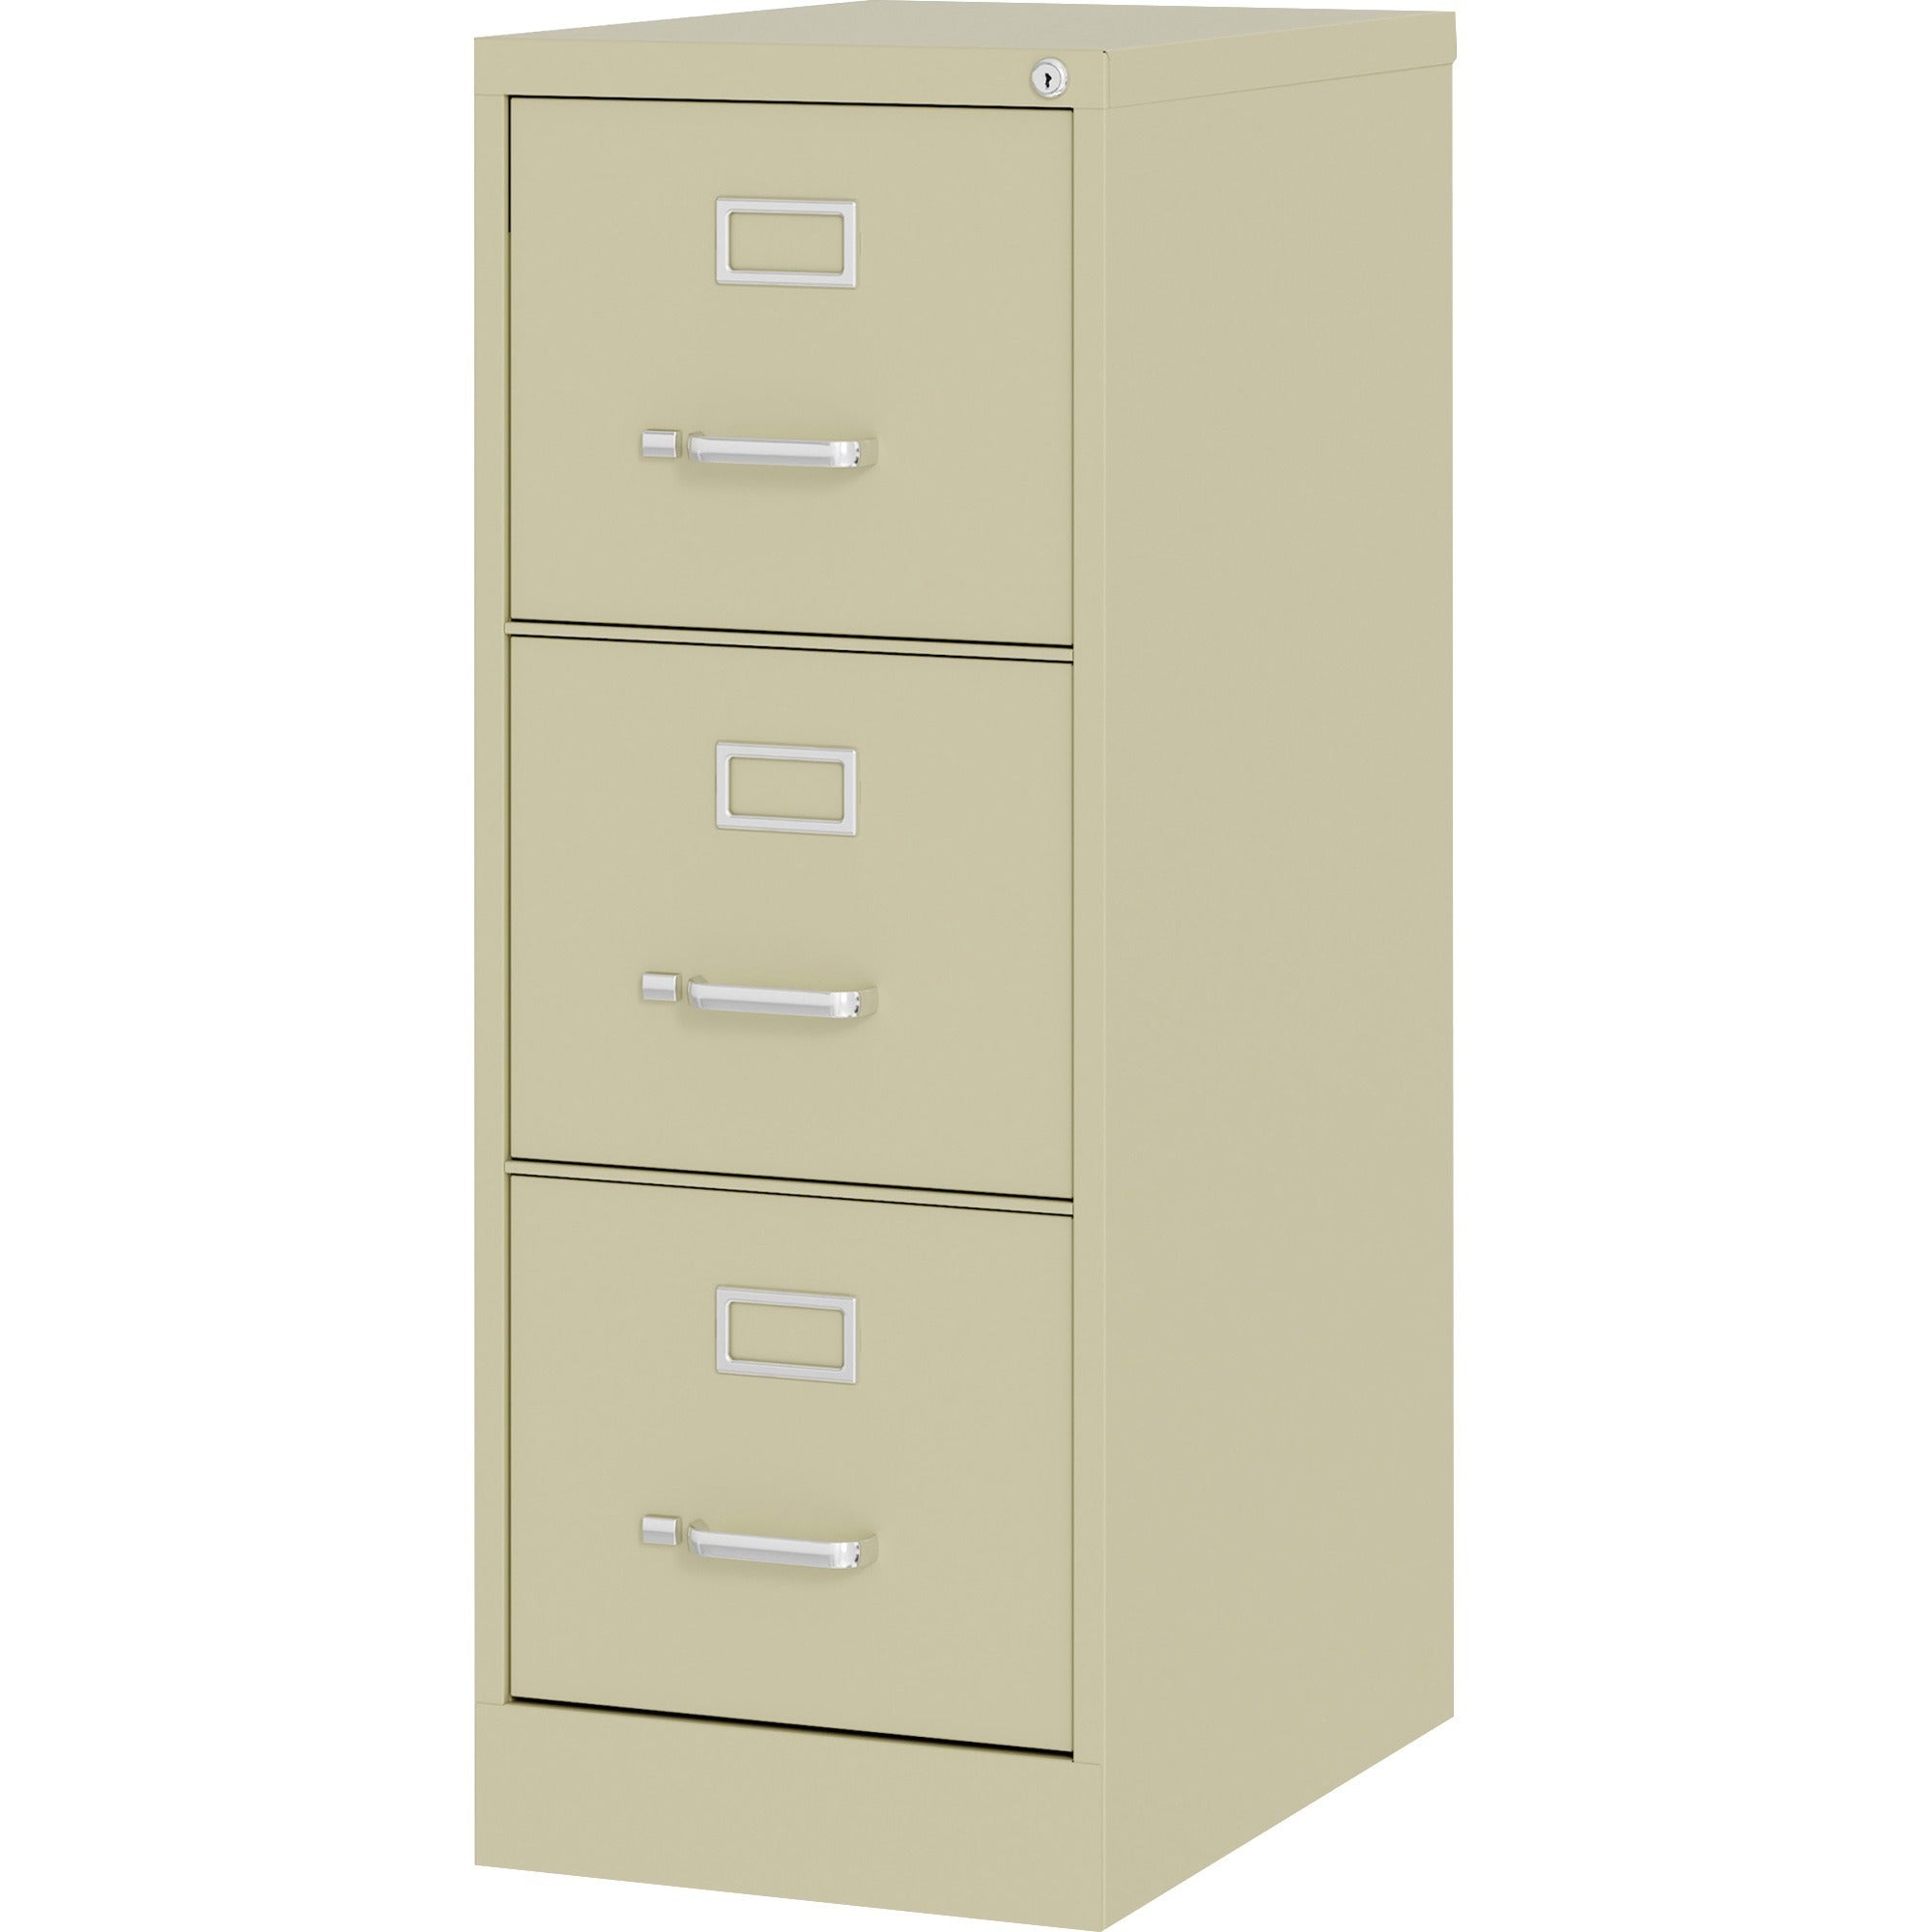 lorell-fortress-series-22-commercial-grade-vertical-file-cabinet-15-x-22-x-402-3-x-drawers-for-file-letter-vertical-ball-bearing-suspension-removable-lock-pull-handle-wire-management-putty-steel-recycled_llr42296 - 3